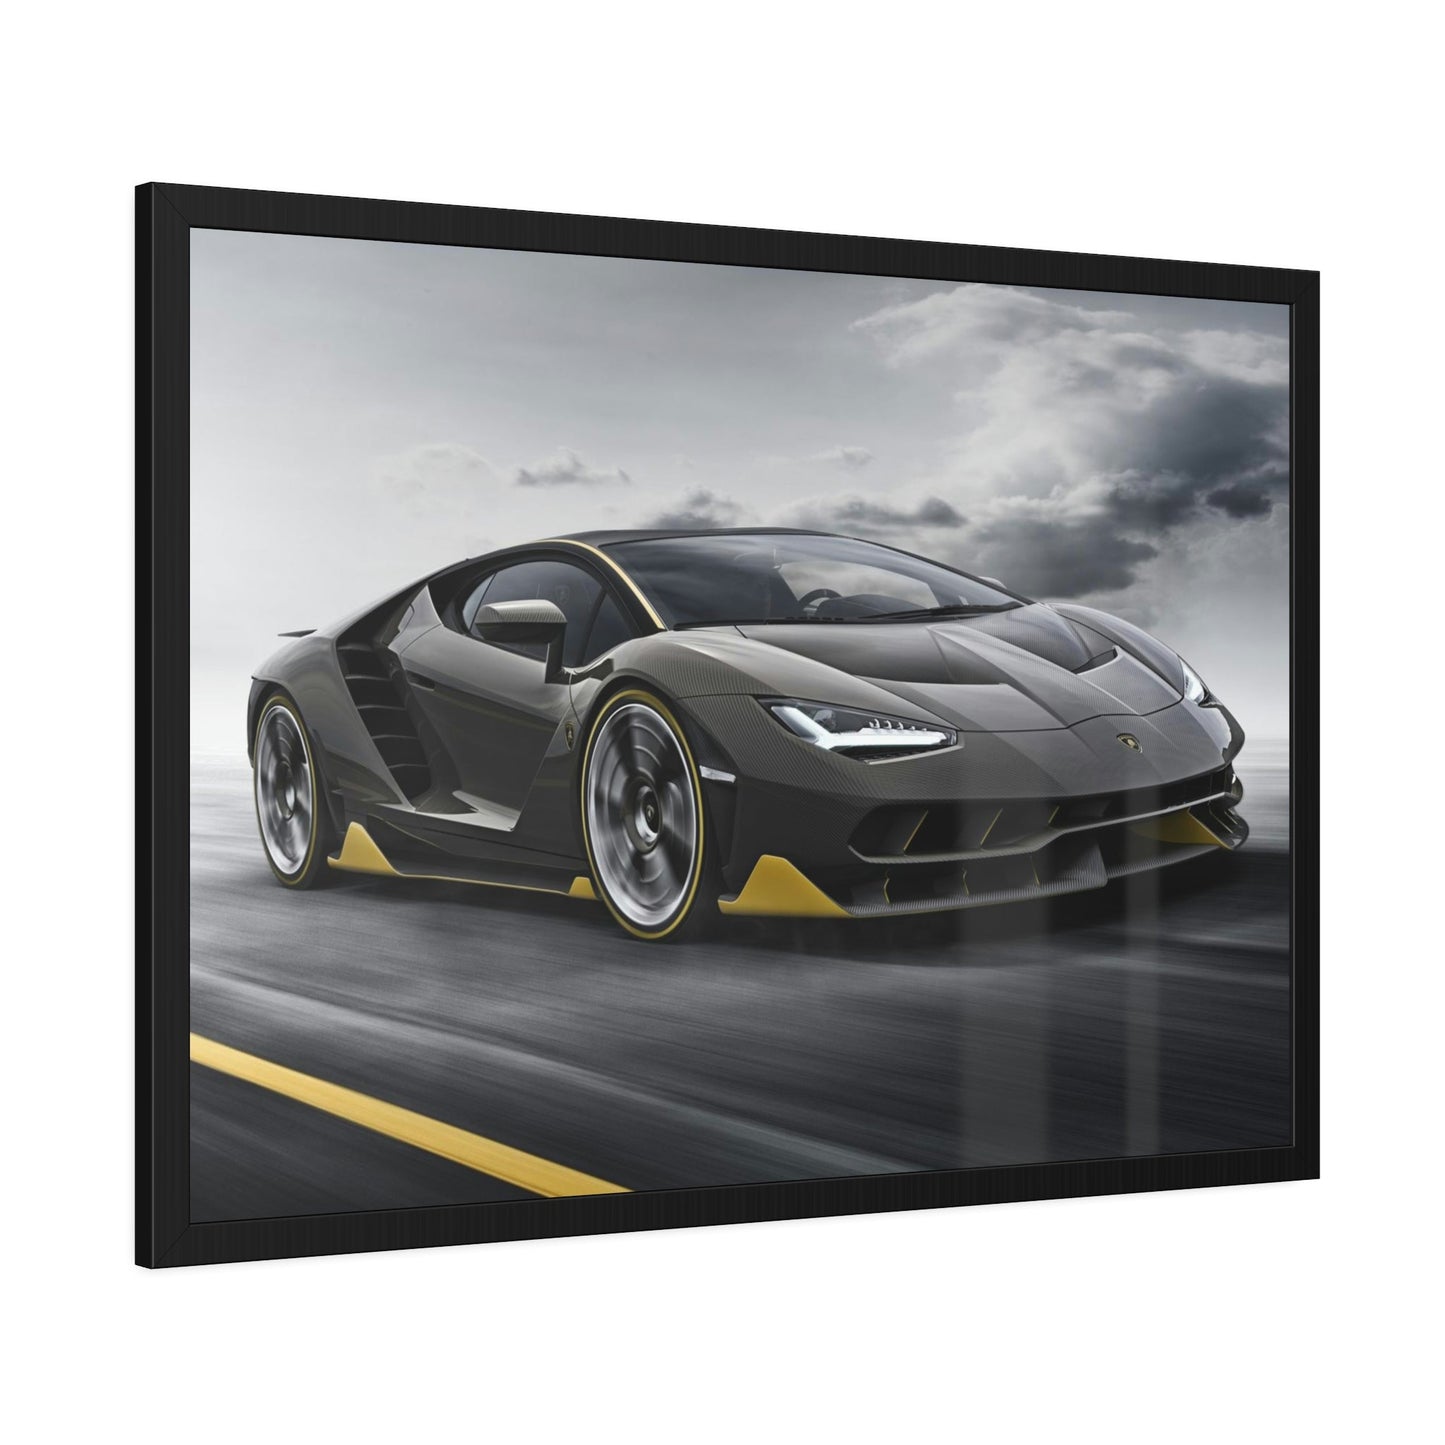 Italian Engineering Masterpiece: Canvas & Poster of a Lamborghini on High-Quality Print